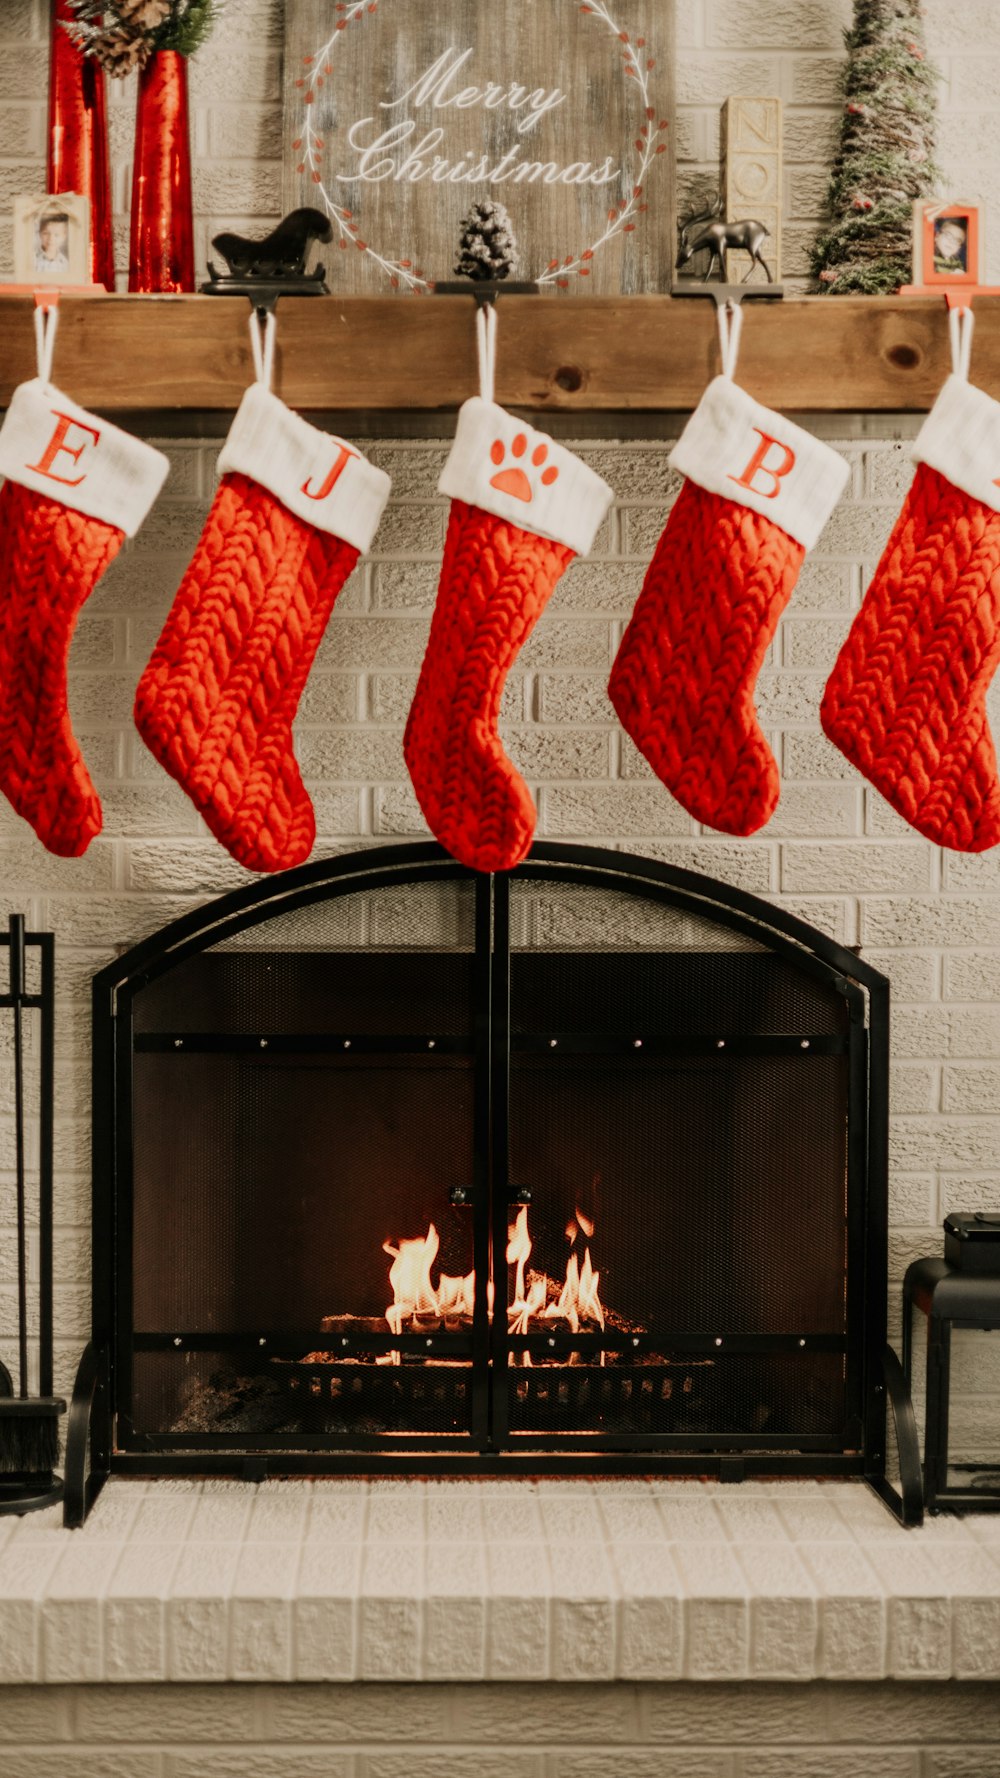 a fireplace with stockings hanging over it